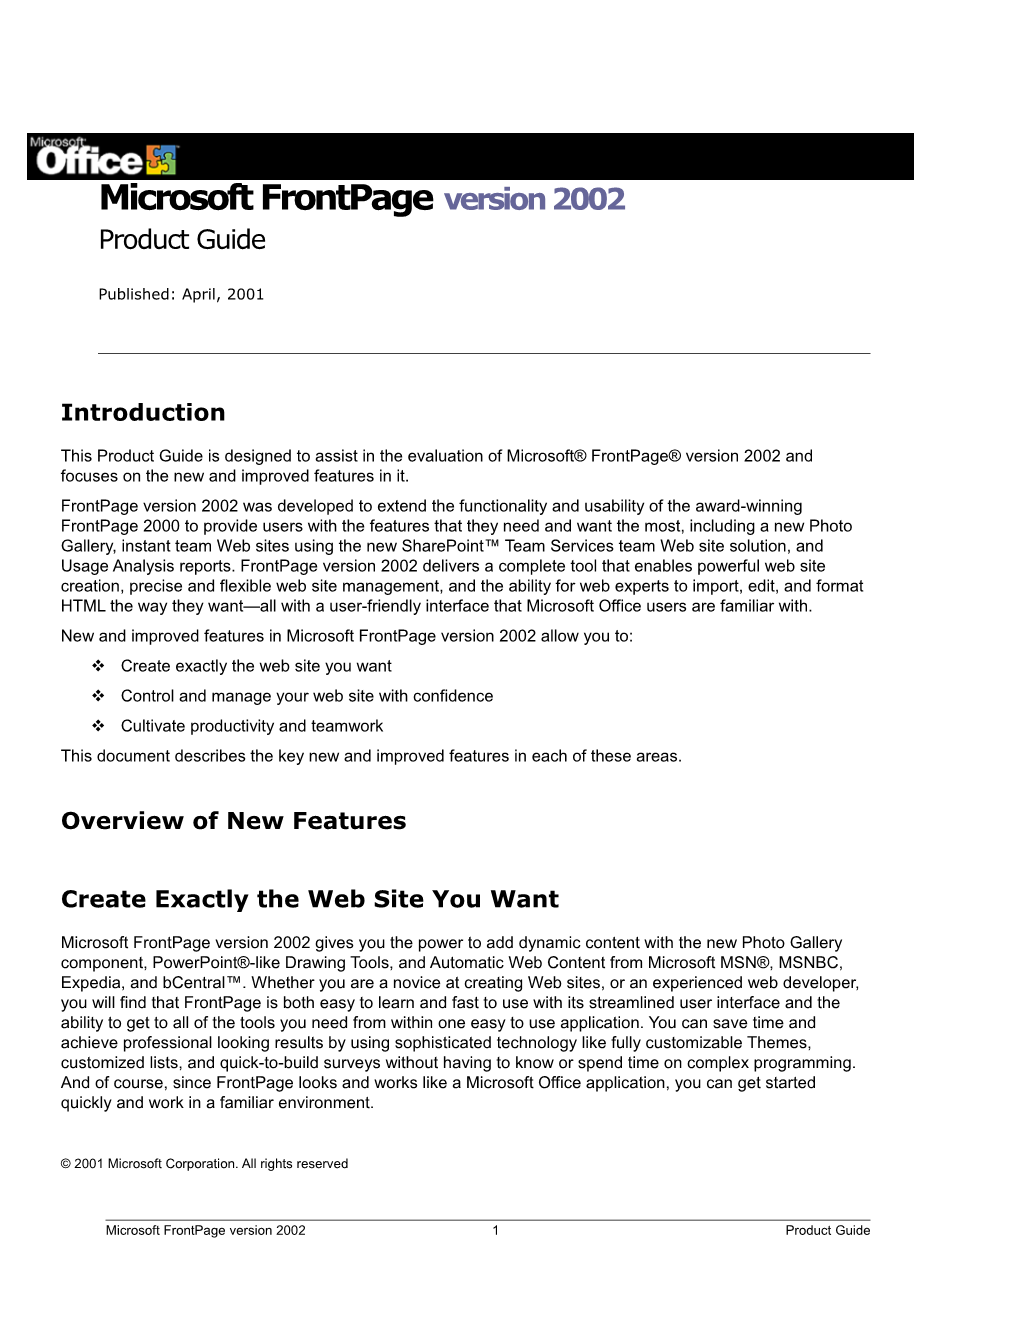 Frontpage Version 2002 Product Guide